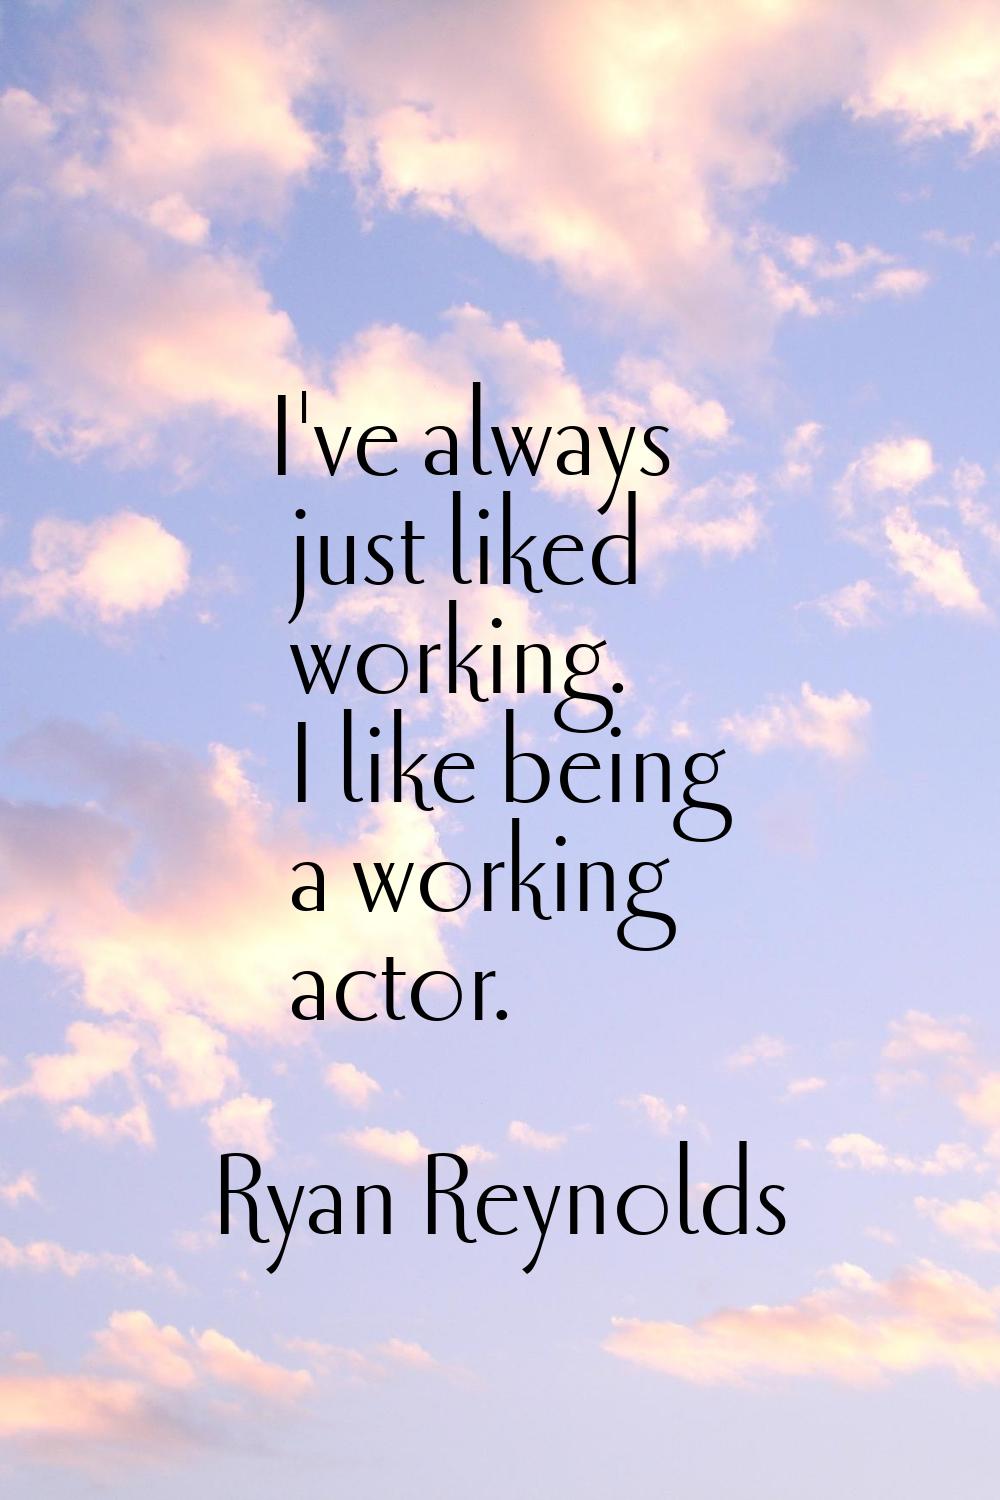 I've always just liked working. I like being a working actor.